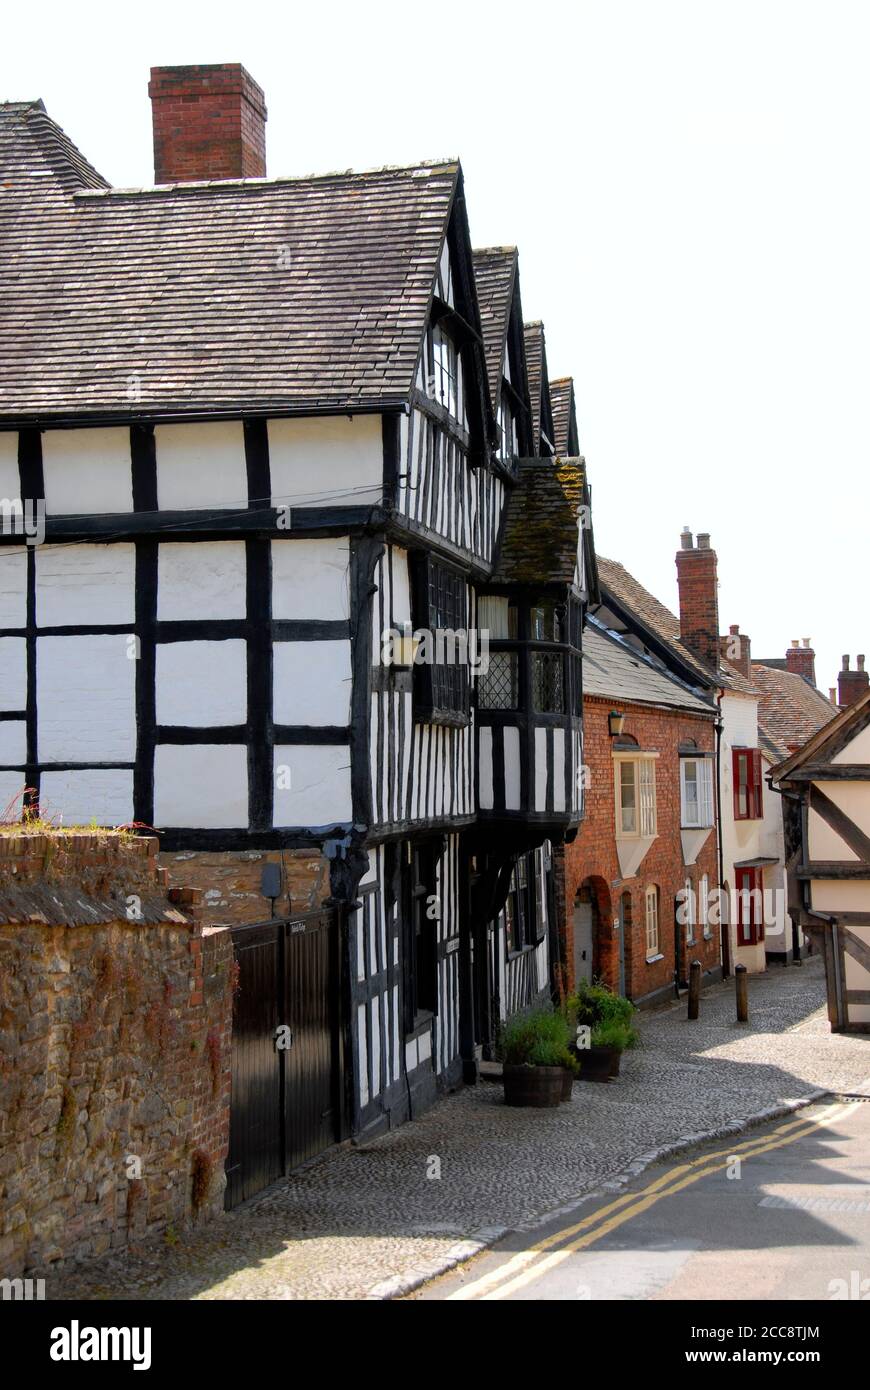 Church Lane, Ledbury, Herefordshire, England, with Church House, the half-timbered building, on the left hand side Stock Photo